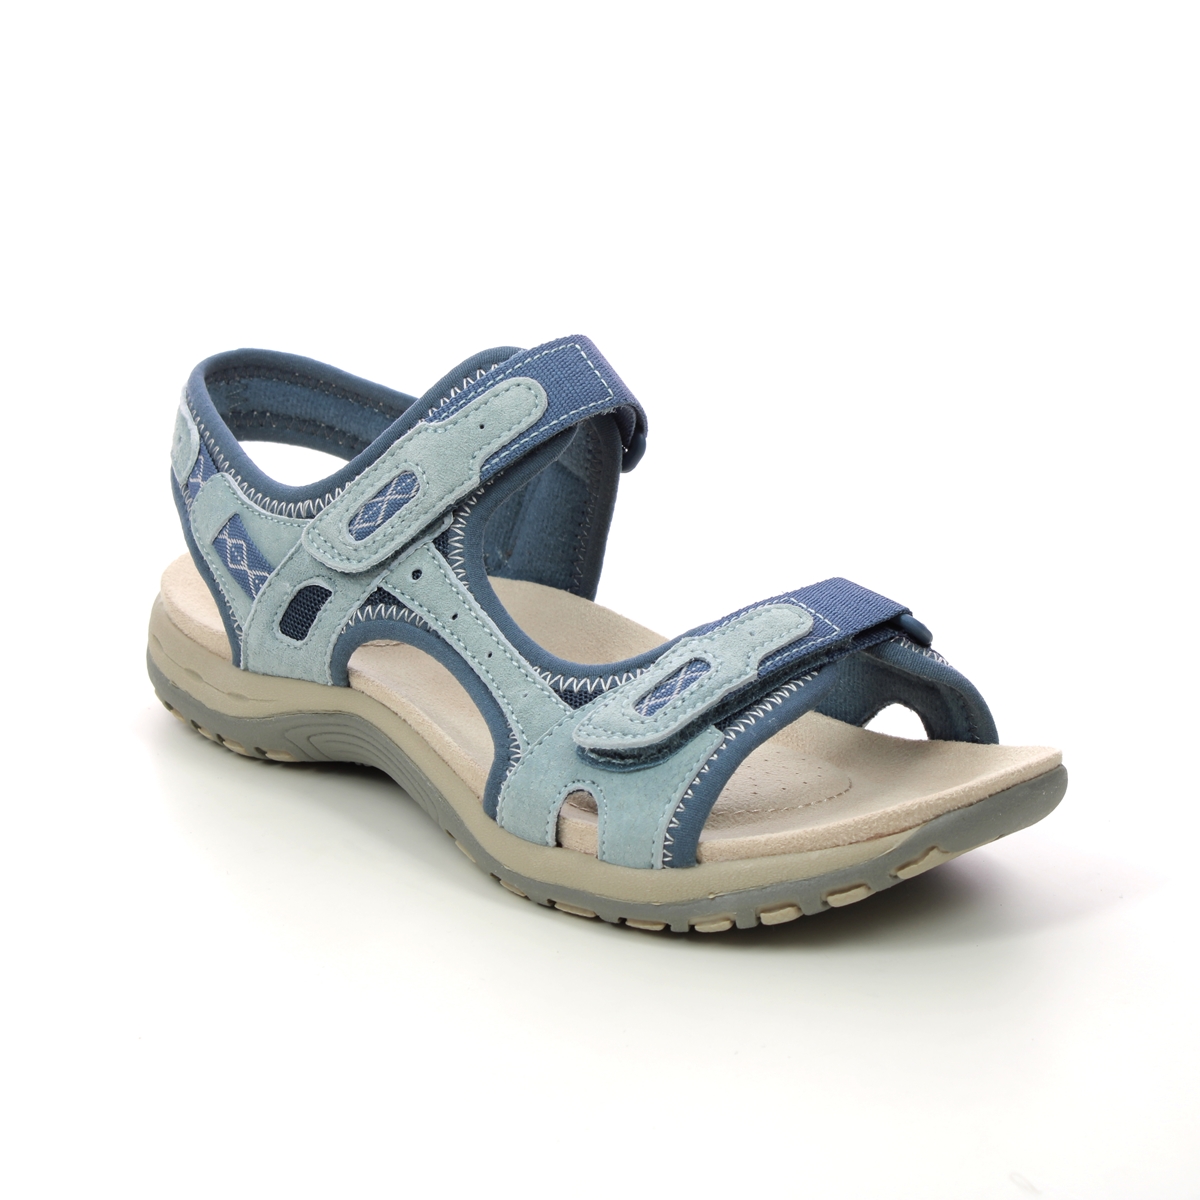 Earth Spirit Frisco Blue Suede Womens Walking Sandals 30526-72 in a Plain Leather in Size 5